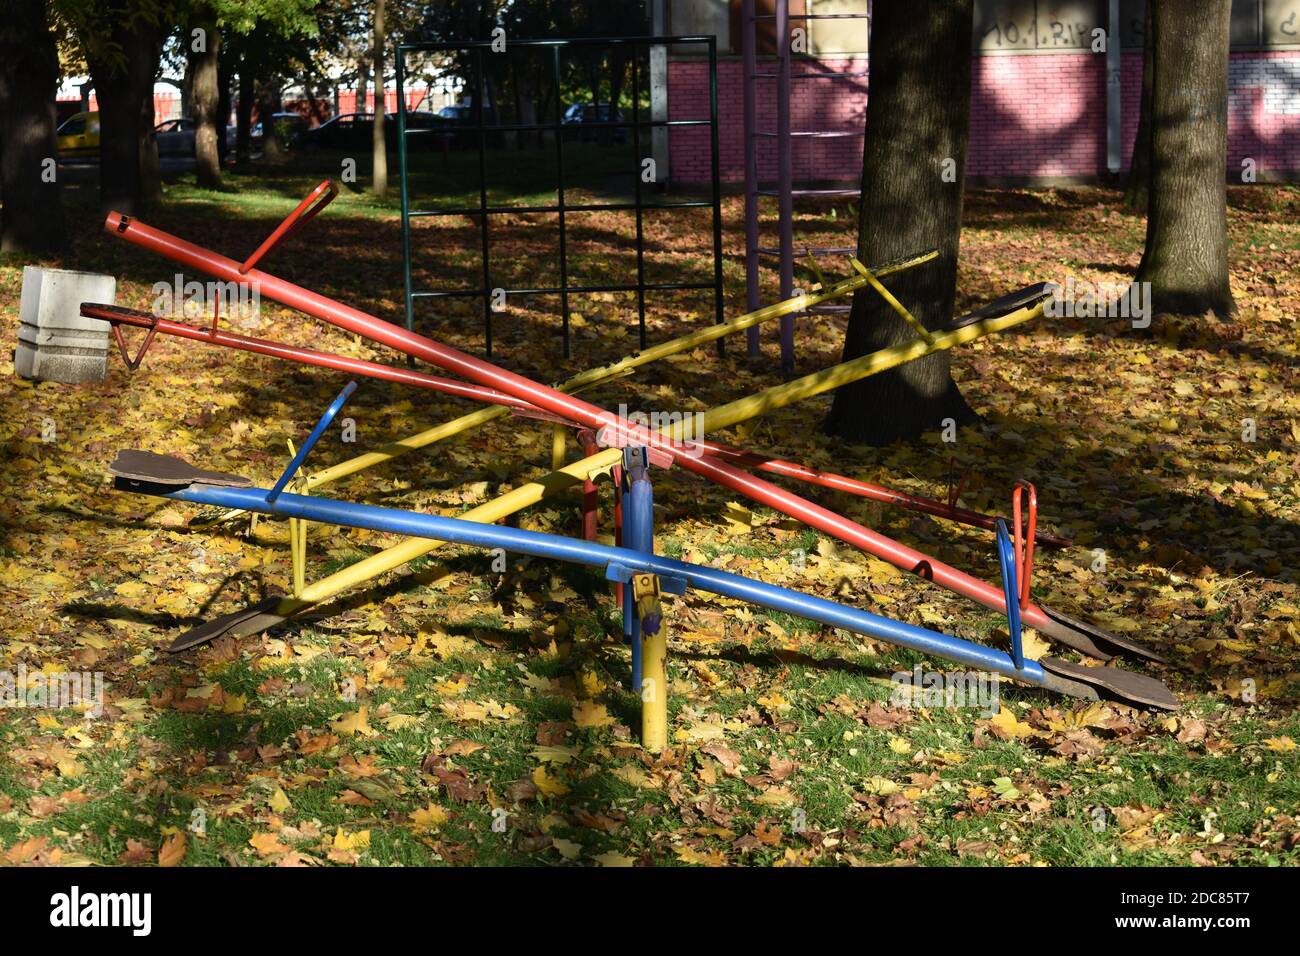 childless swings in the park in the covid-19 era Stock Photo